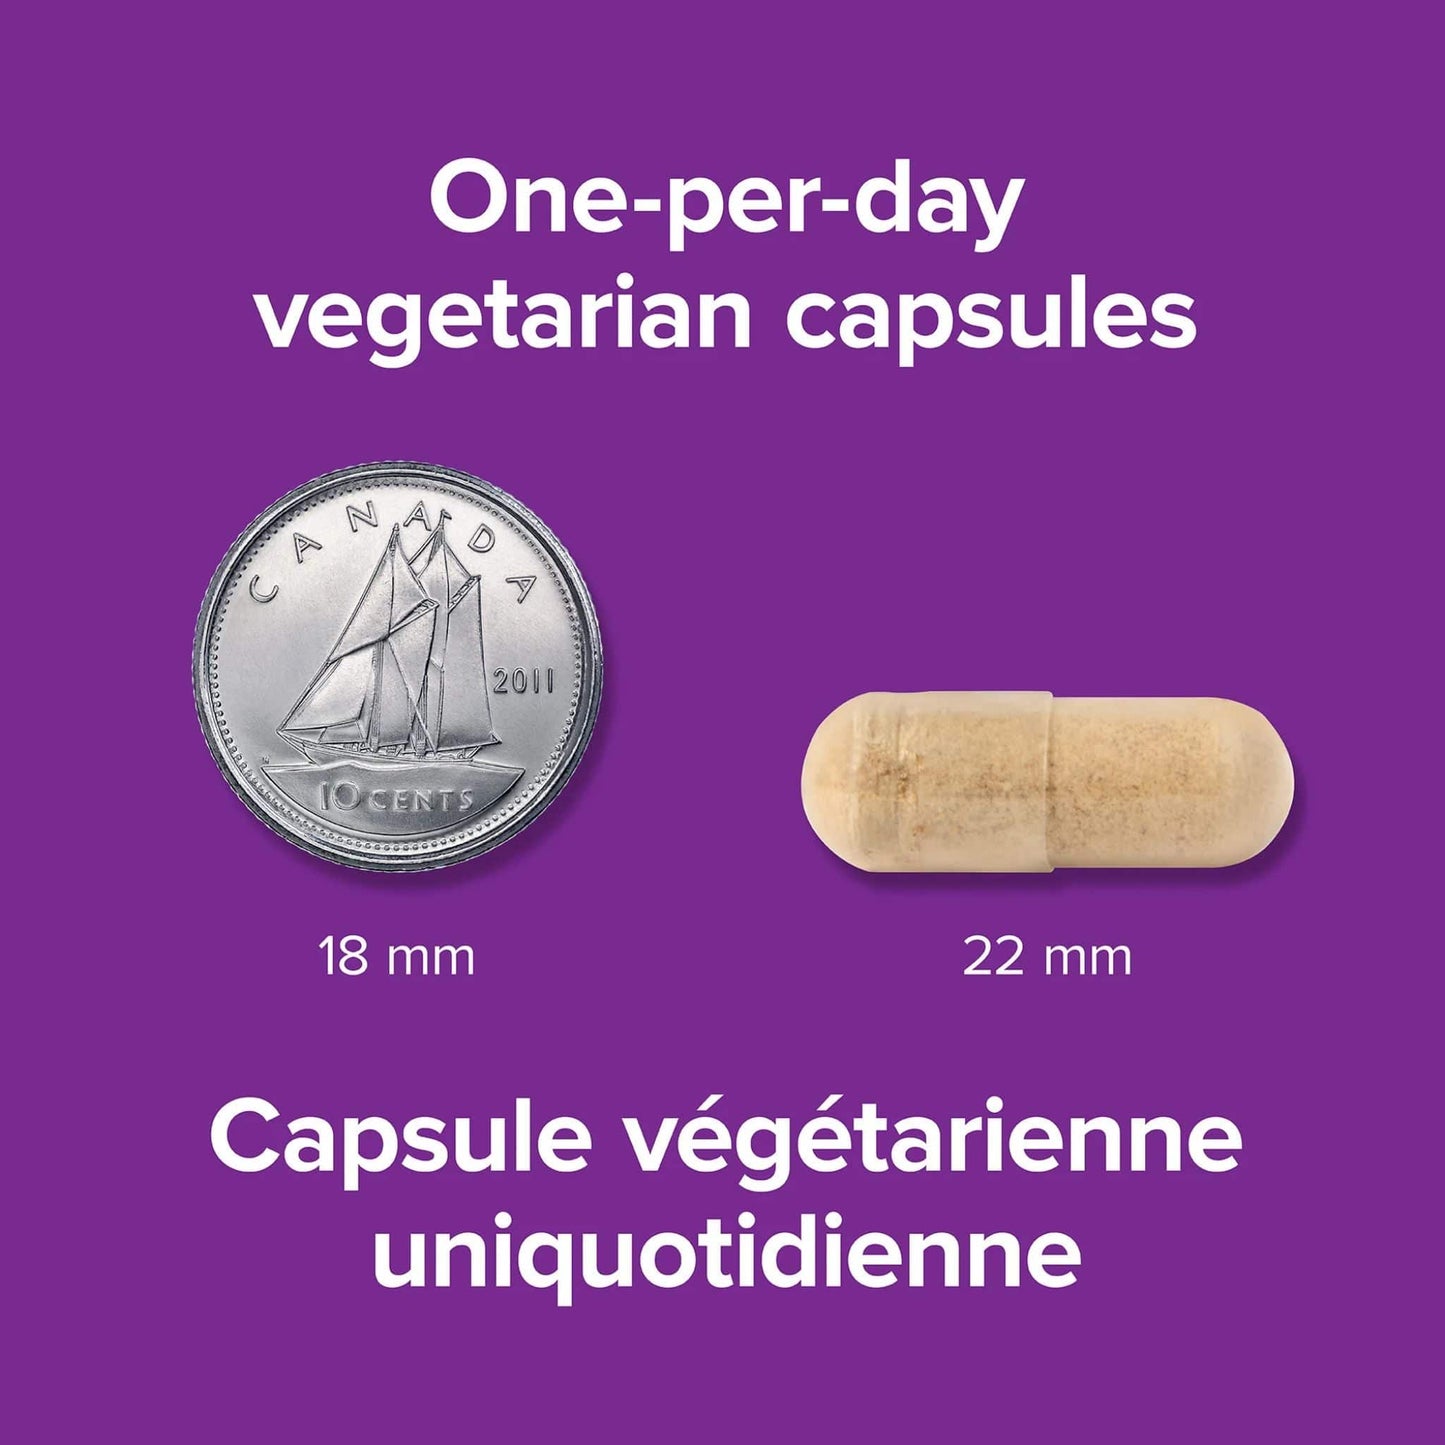 60 Vegetable Capsules | Webber Naturals Ashwagandha 7200mg One Per Day Capsule size comparison